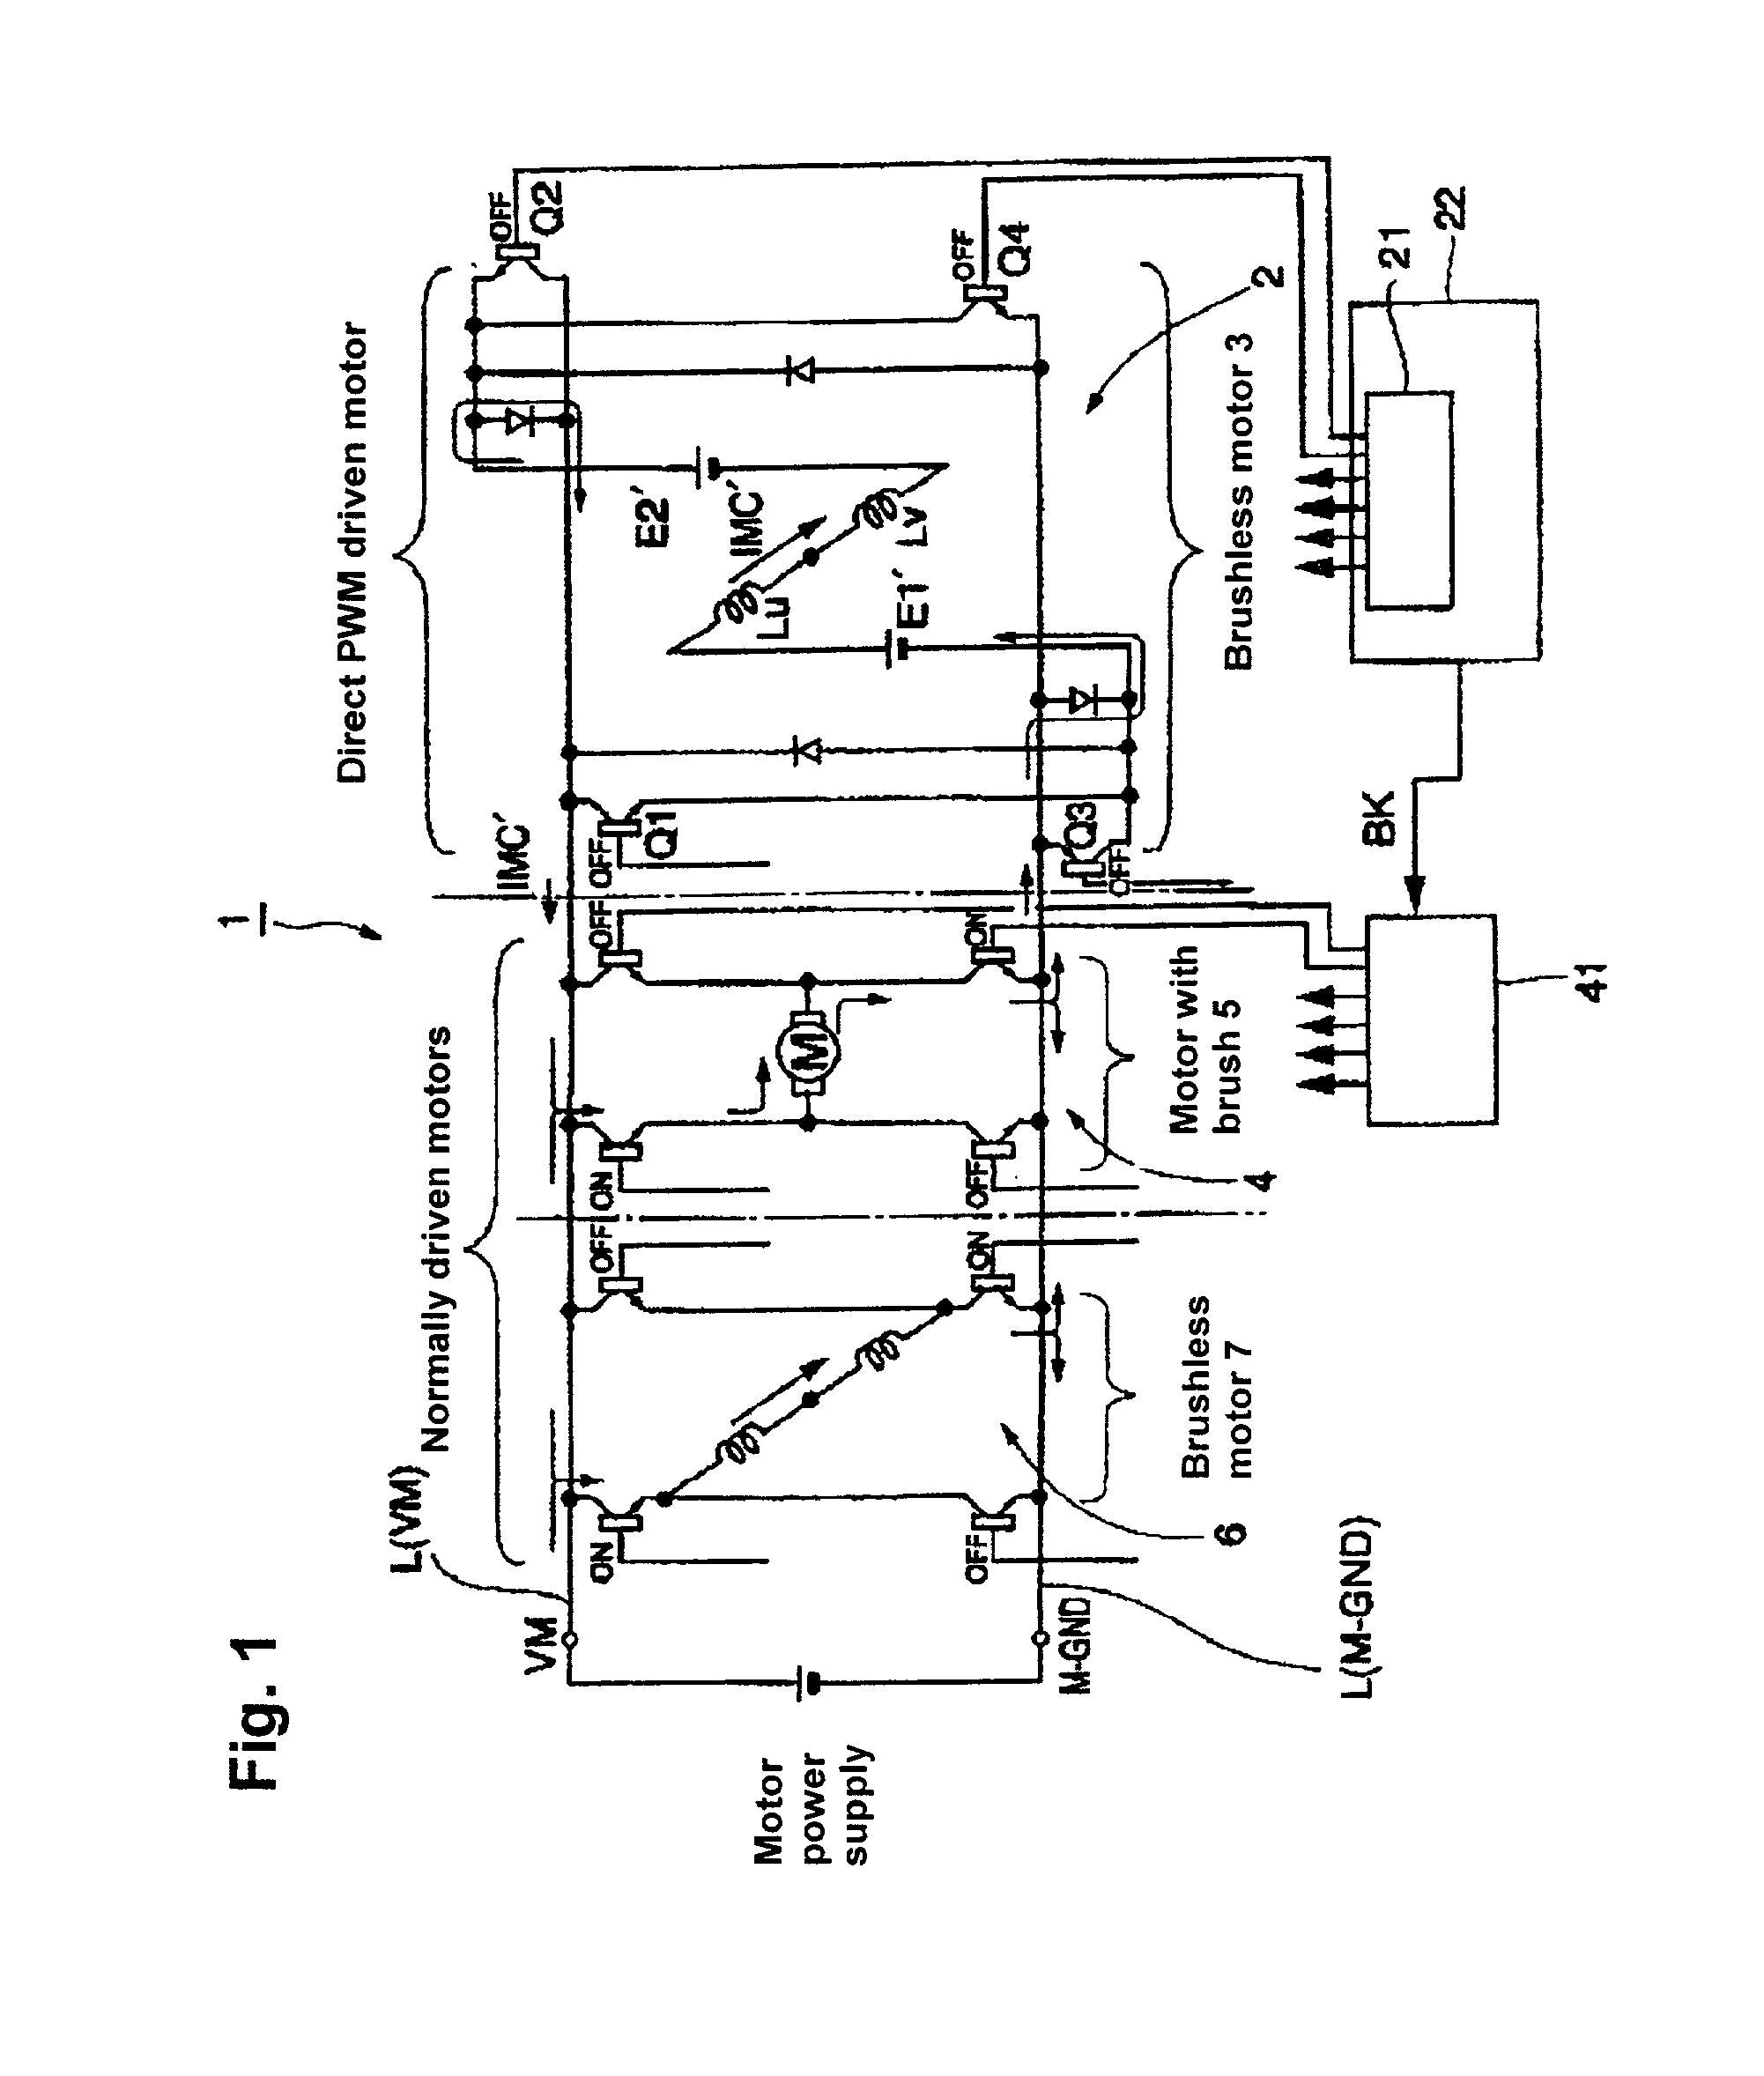 Method for driving motors and apparatus for driving motors